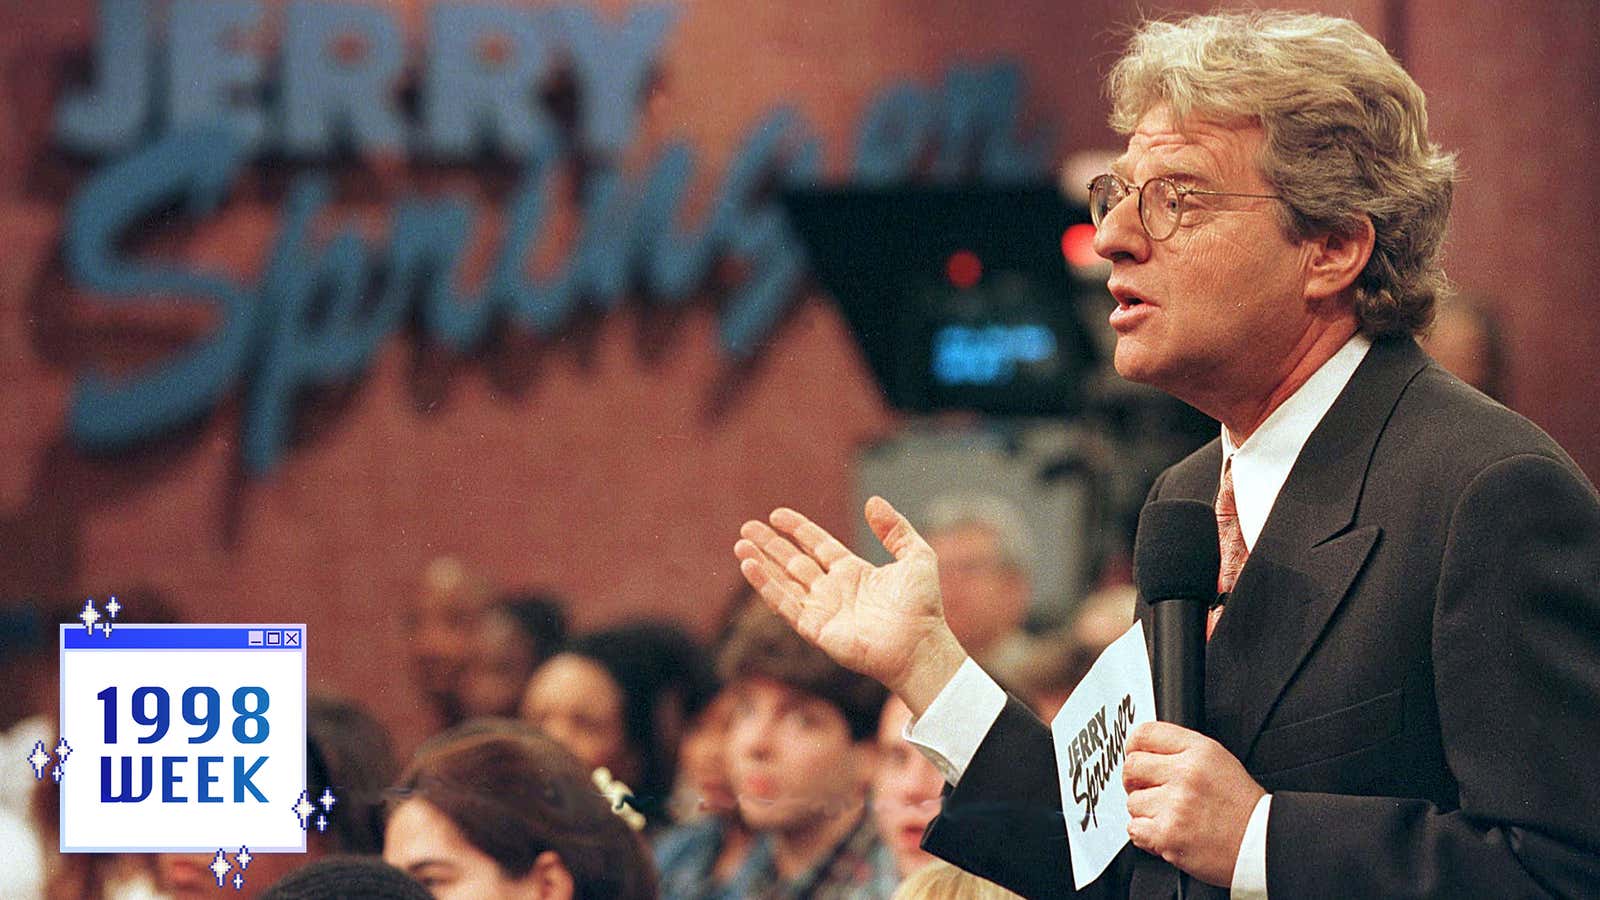 organisere leje pakke Trash, class, and free cigarettes: My life with The Jerry Springer Show